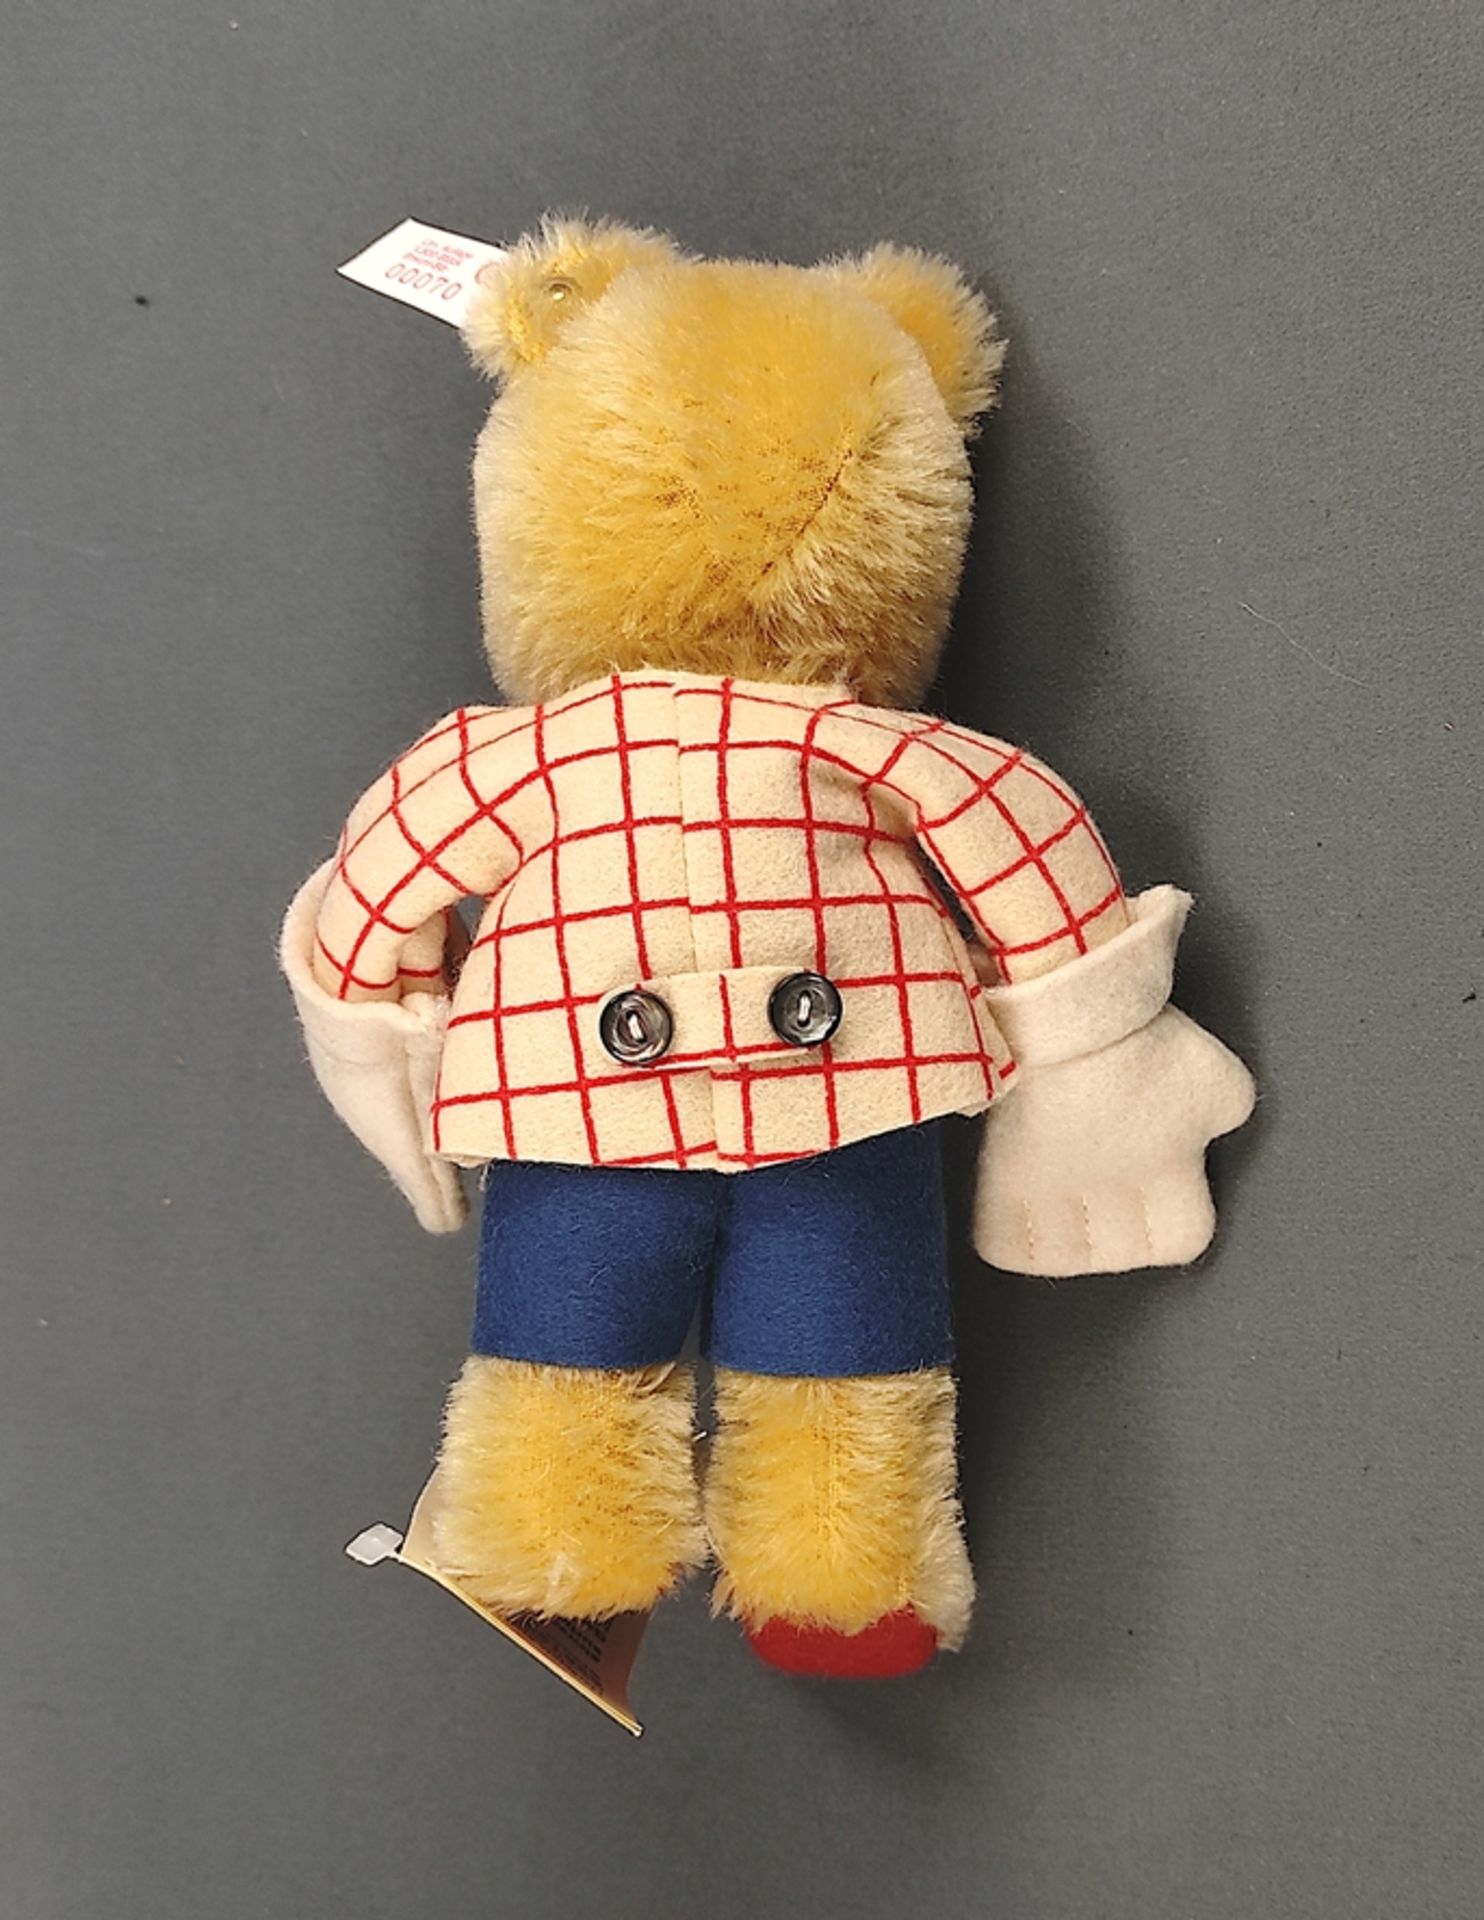 Steiff "Breuni-Bear", 655135, Ex. 70/1500,1995, length 20cm, with button, sign and flag, in origina - Image 3 of 4